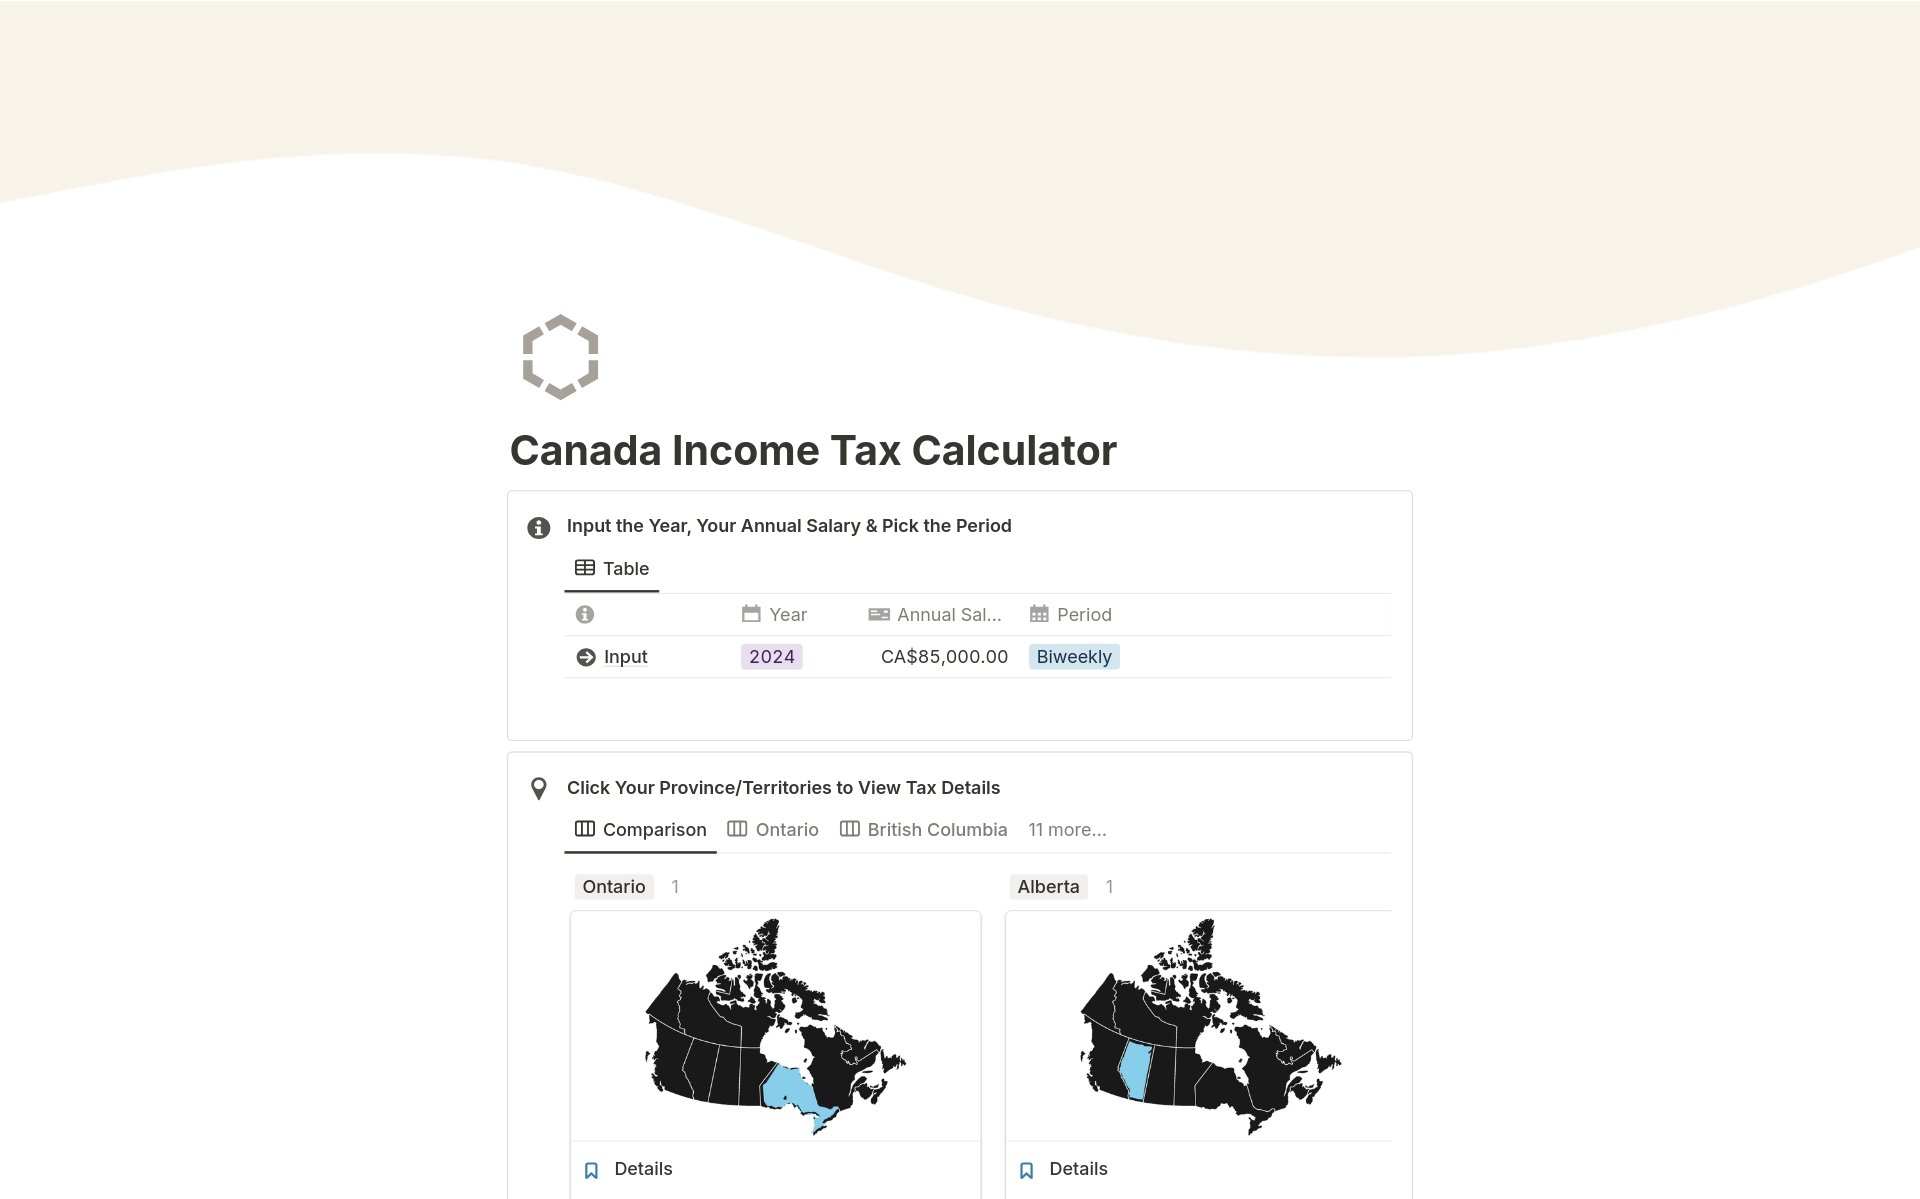 It calculates your Canadian income tax based on the year, your salary and the province that you live in